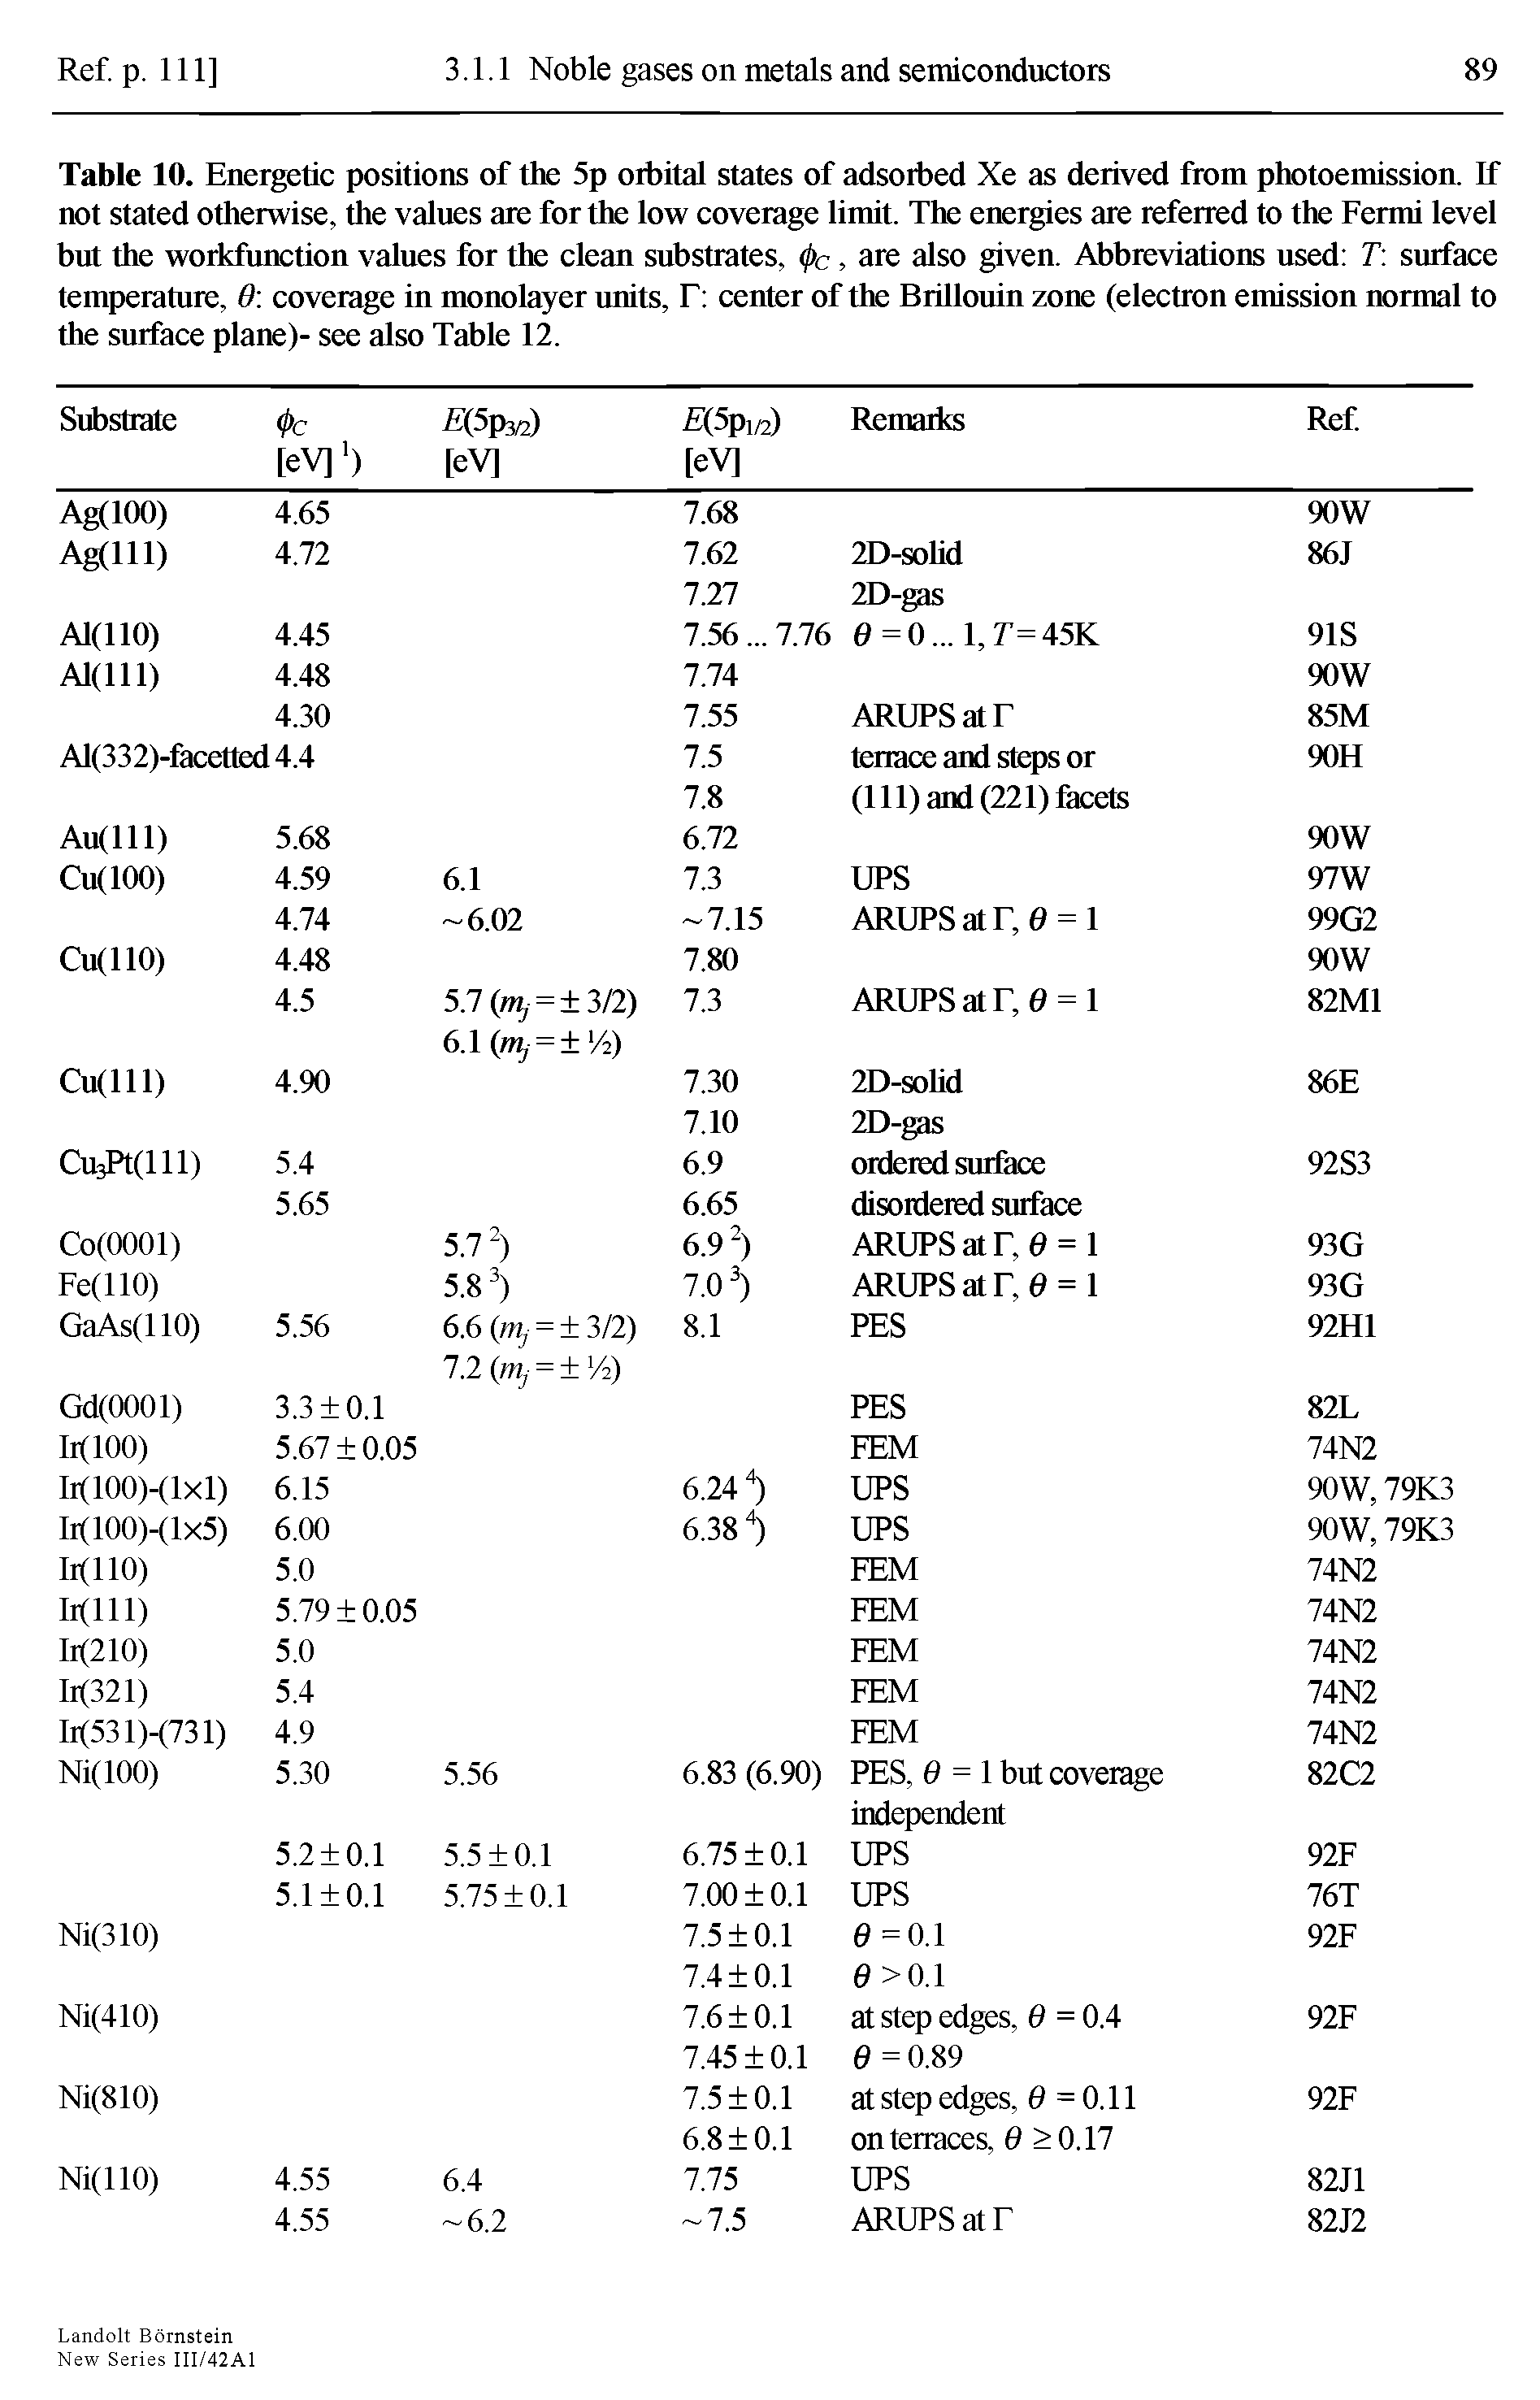 Table 10. Energetic positions of the 5p orbital states of adsorbed Xe as derived from photoemission. If not stated otherwise, the values are for the low coverage limit. The energies are referred to the Fermi level but the workfunction values for the clean substrates, (j)c, are also given. Abbreviations used T surface temperature, 6 coverage in monolayer units, F eenler of the Brillouin zone (electron emission normal to the surface plane)- see also Table 12.